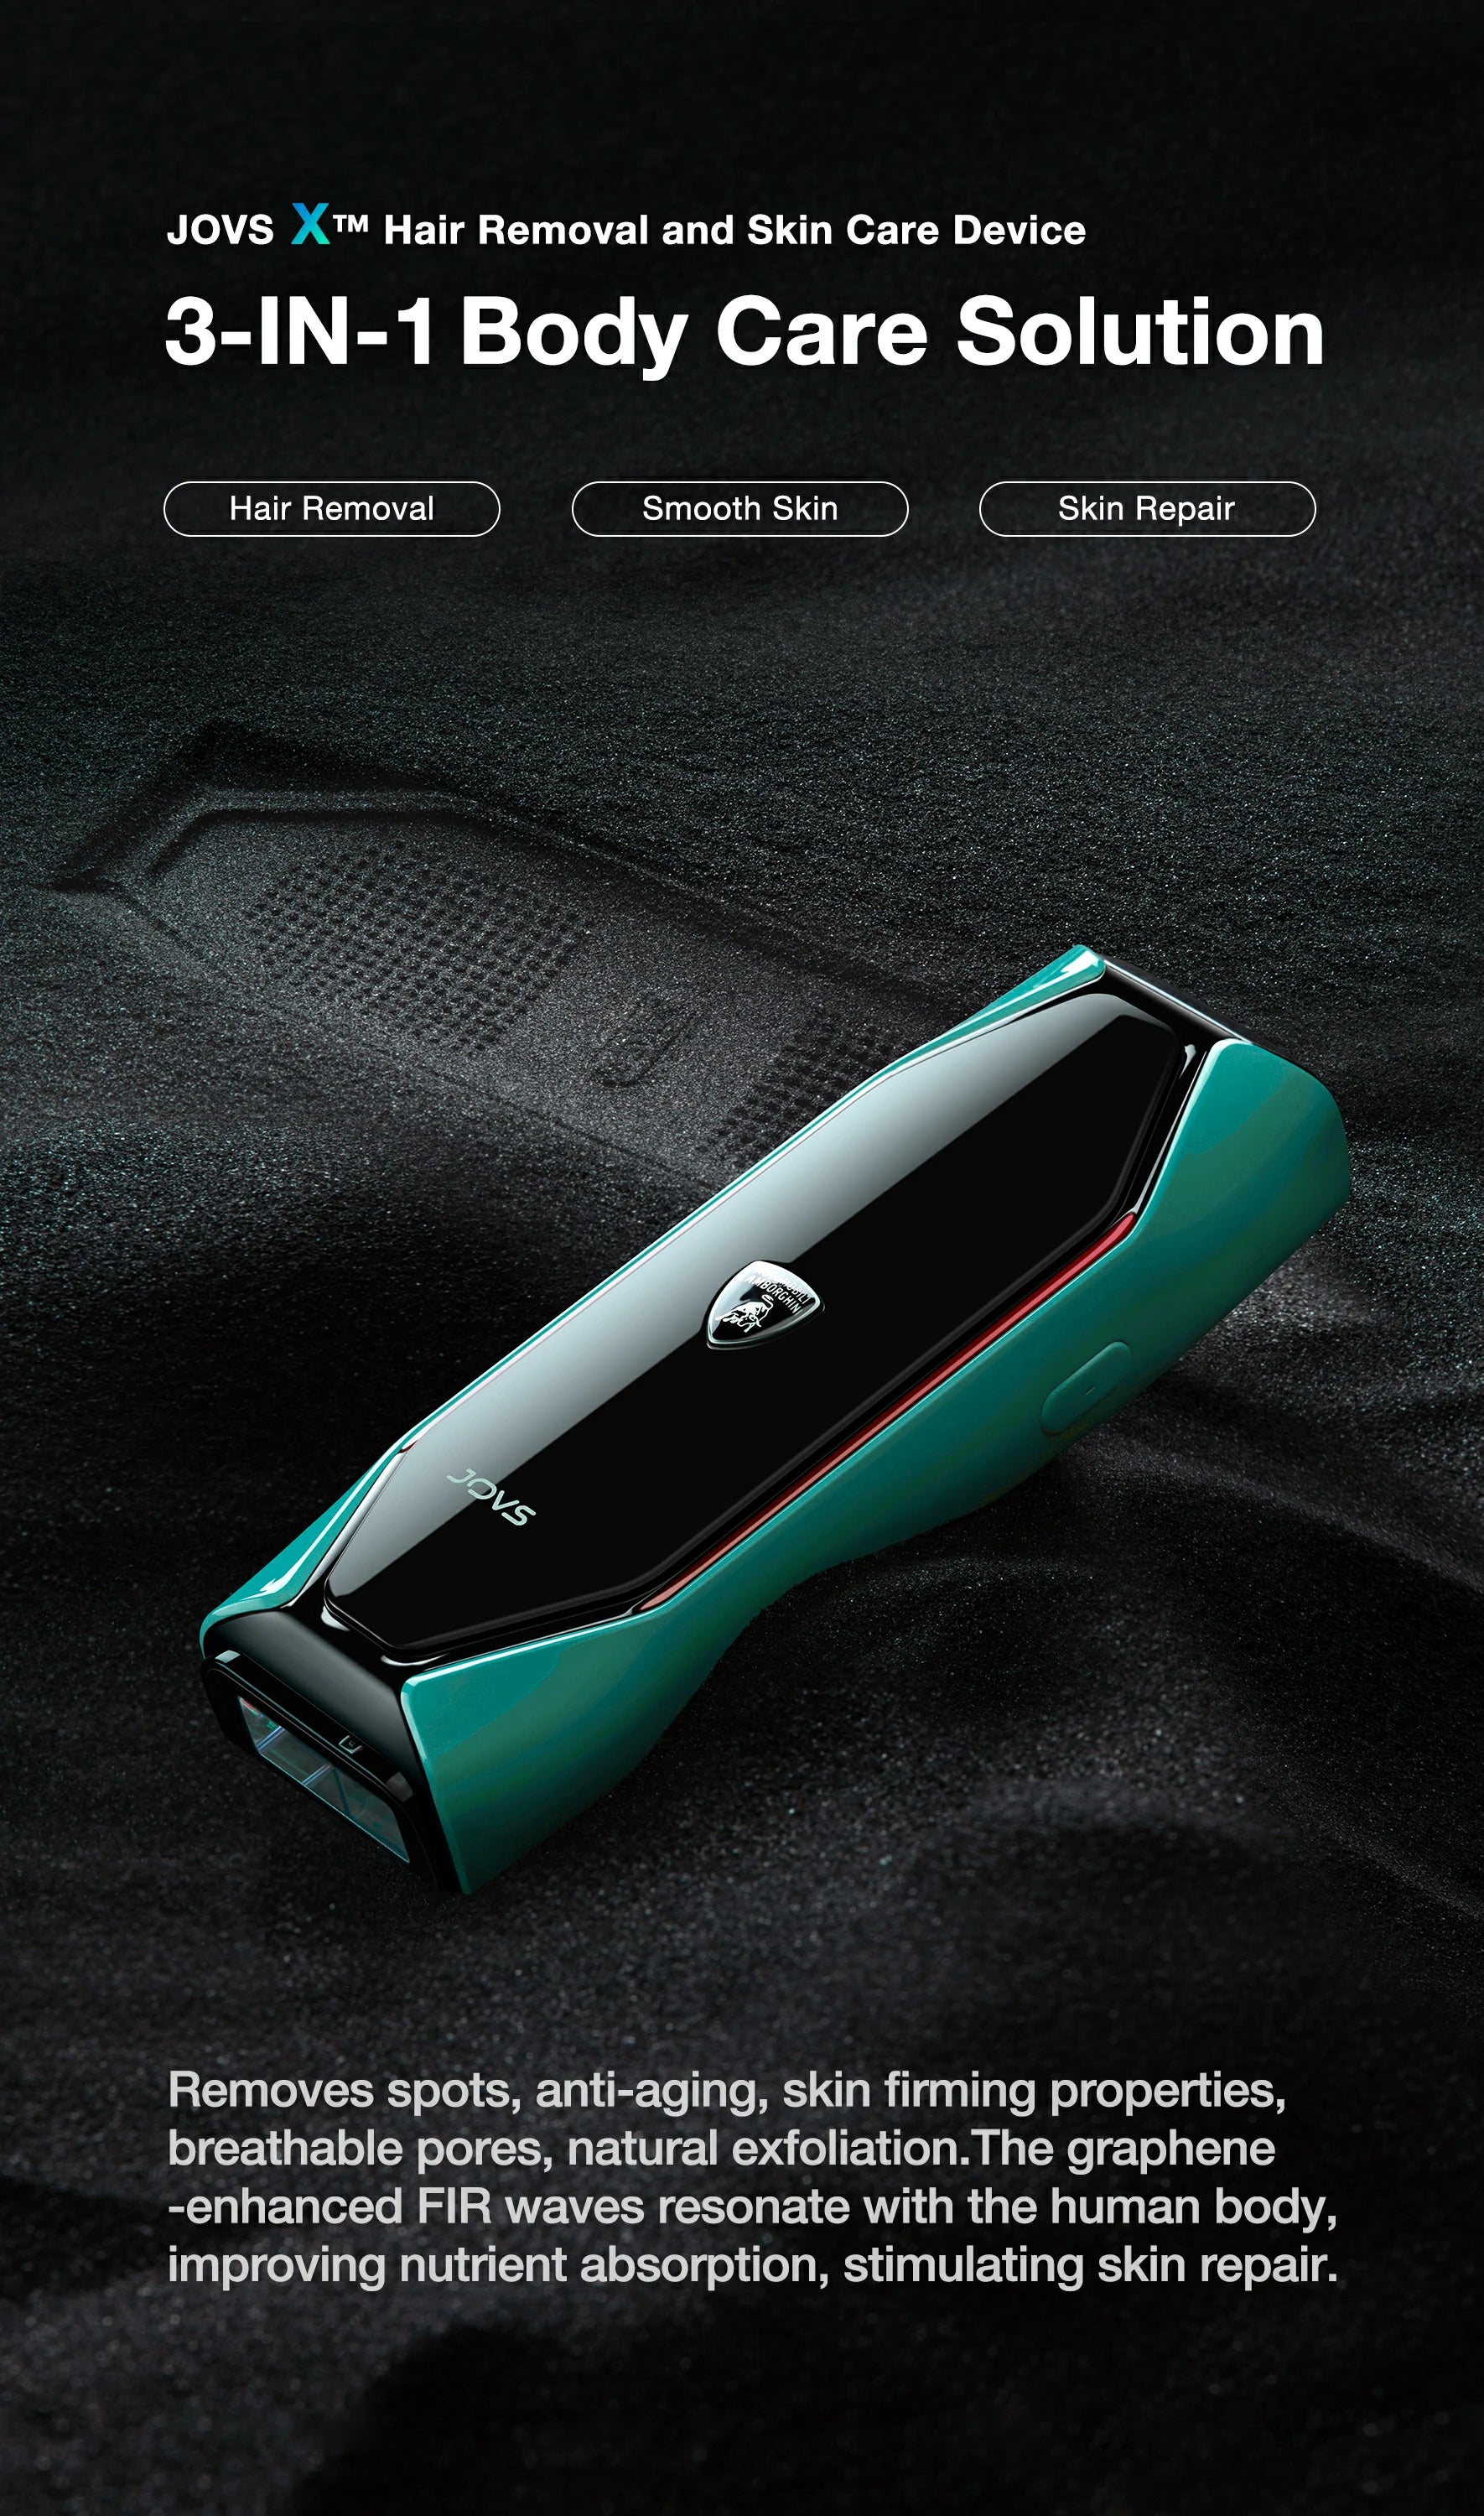 JOVS X™ 3-in-1 Emerald IPL Hair Removal Device for Hair Removal, Smooth Skin, and Skin Repair.